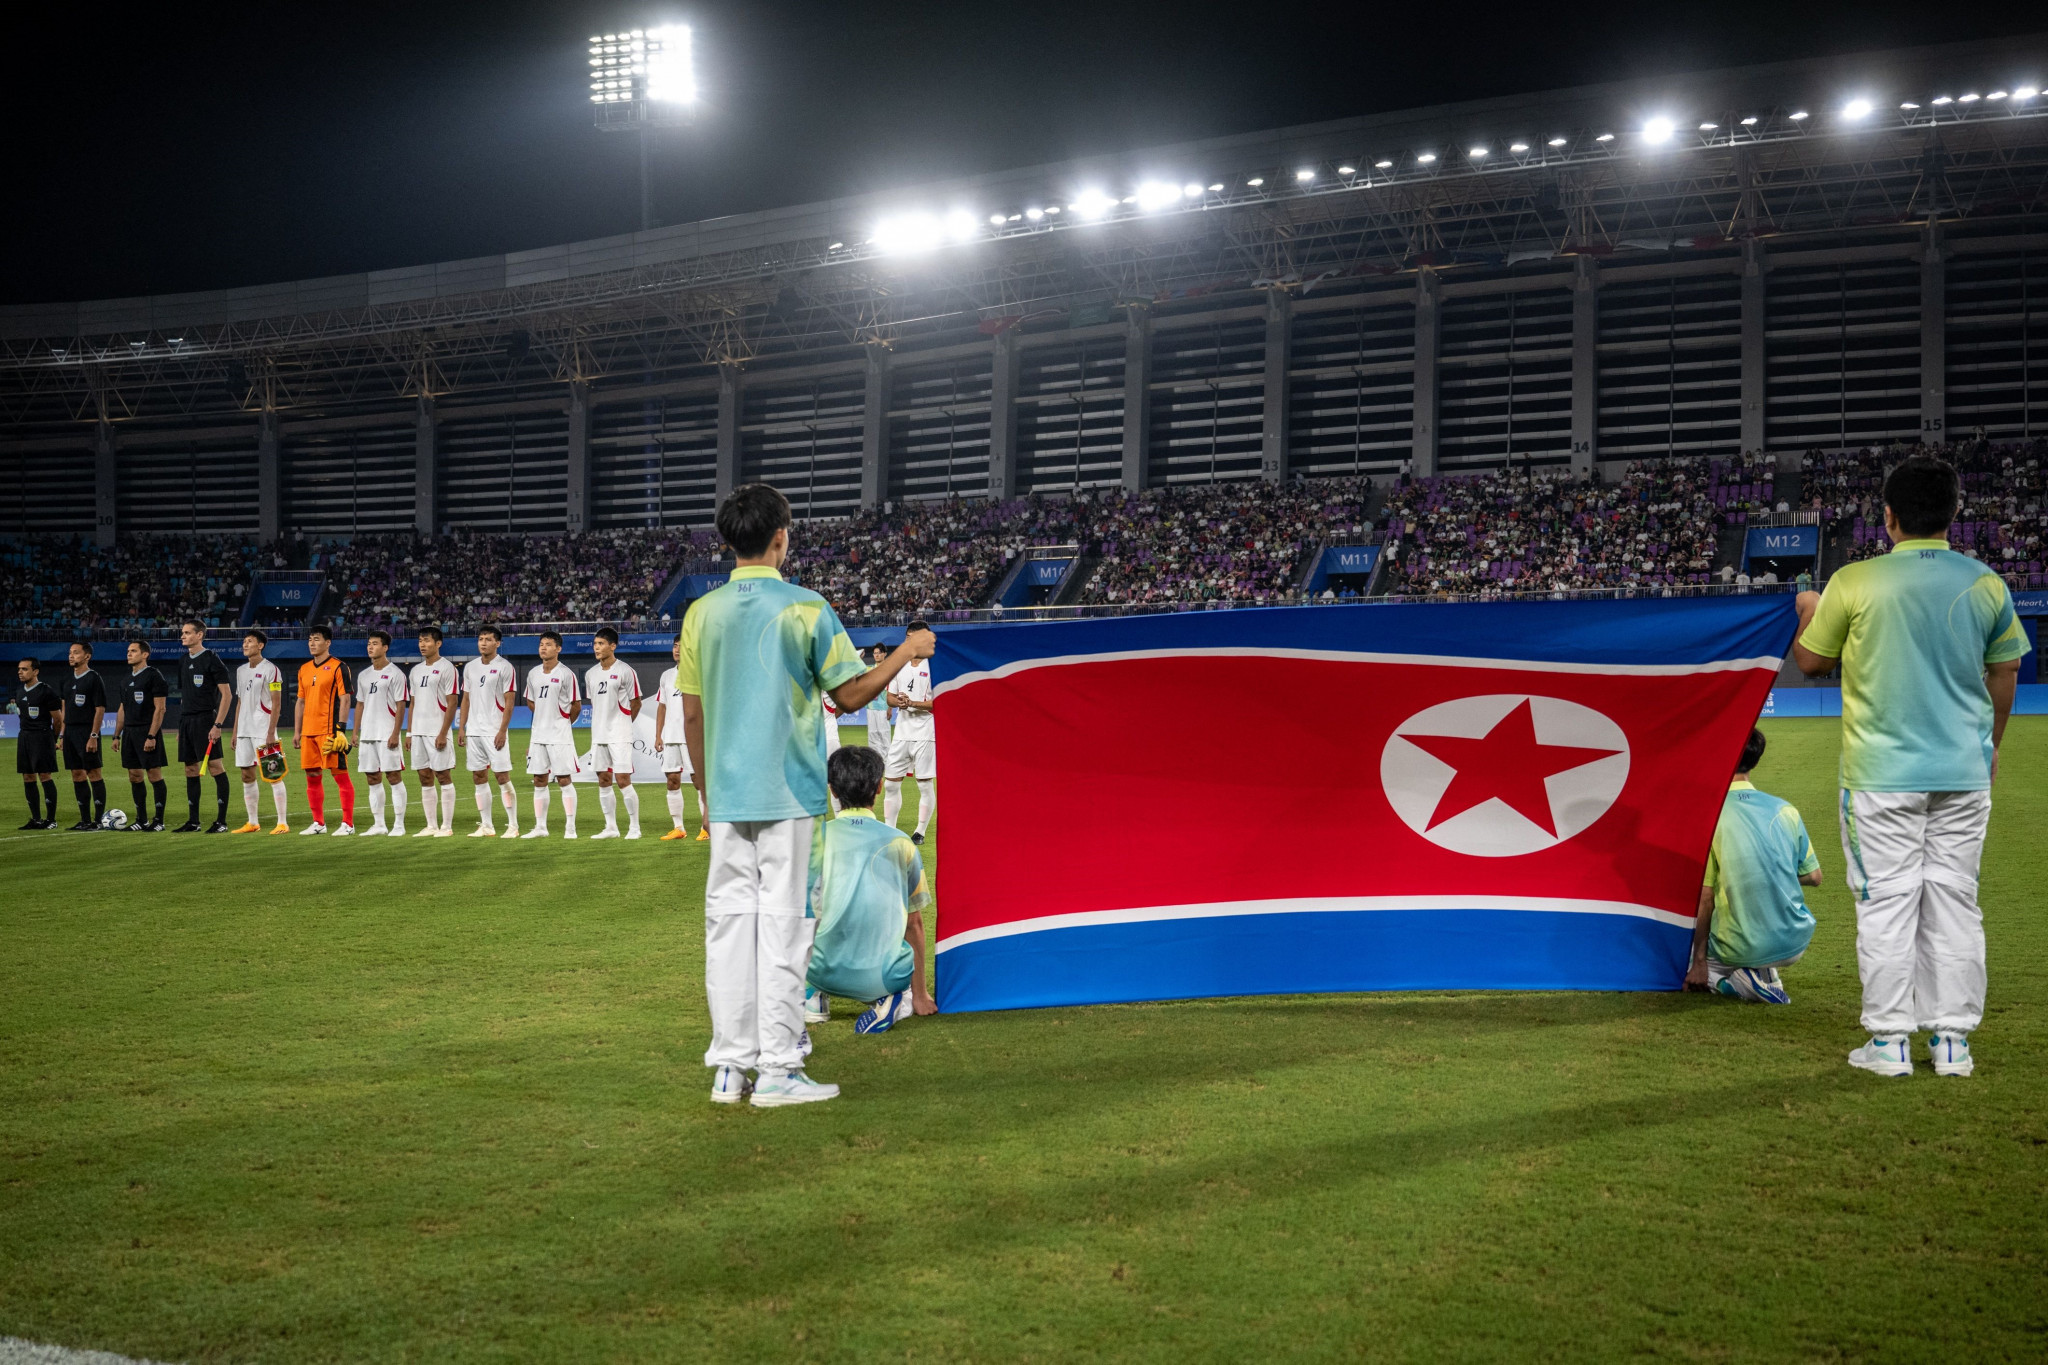 The North Korean flag continues to fly in Hangzhou despite it being banned under WADA sanctions ©Getty Images